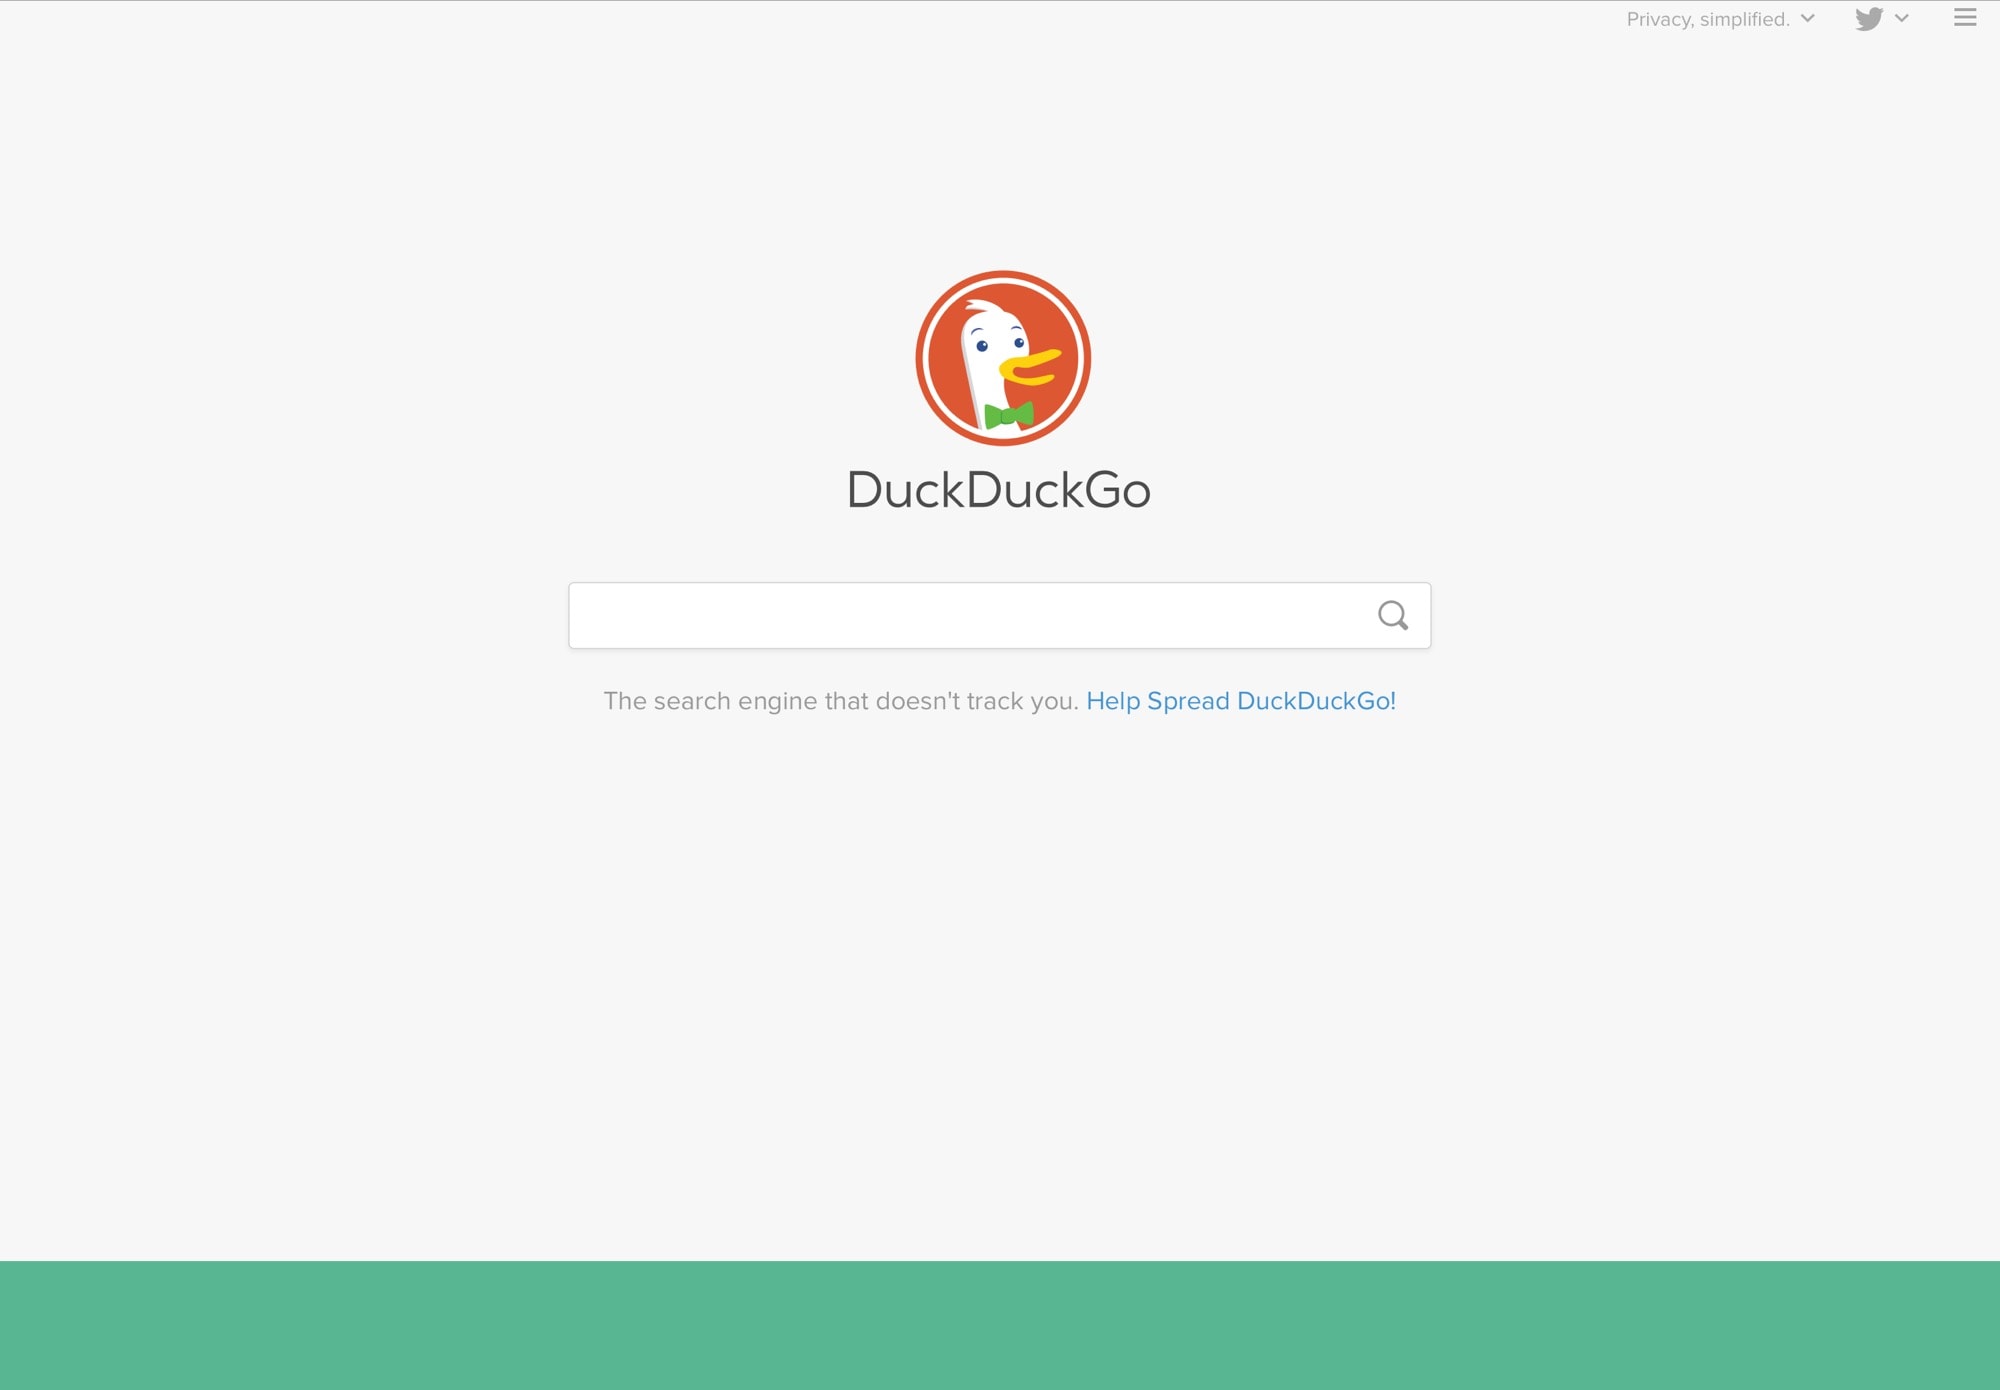 DuckDuckGo doesn't track you the way Google does.